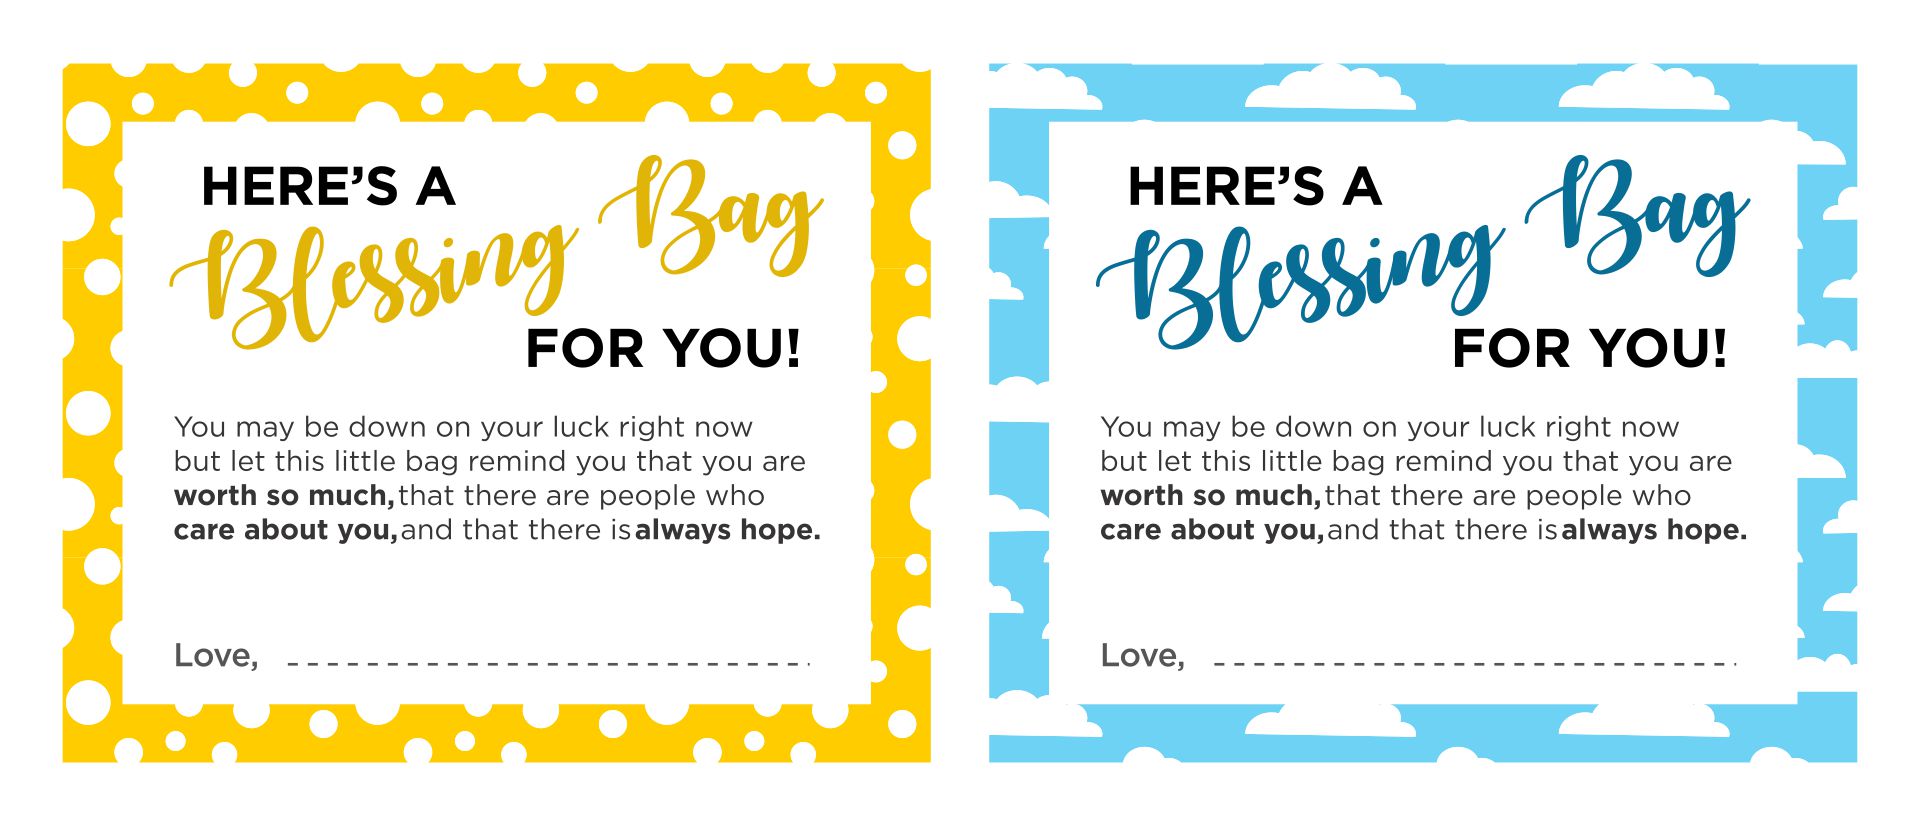 8-best-images-of-blessing-bags-scripture-printable-note-homeless